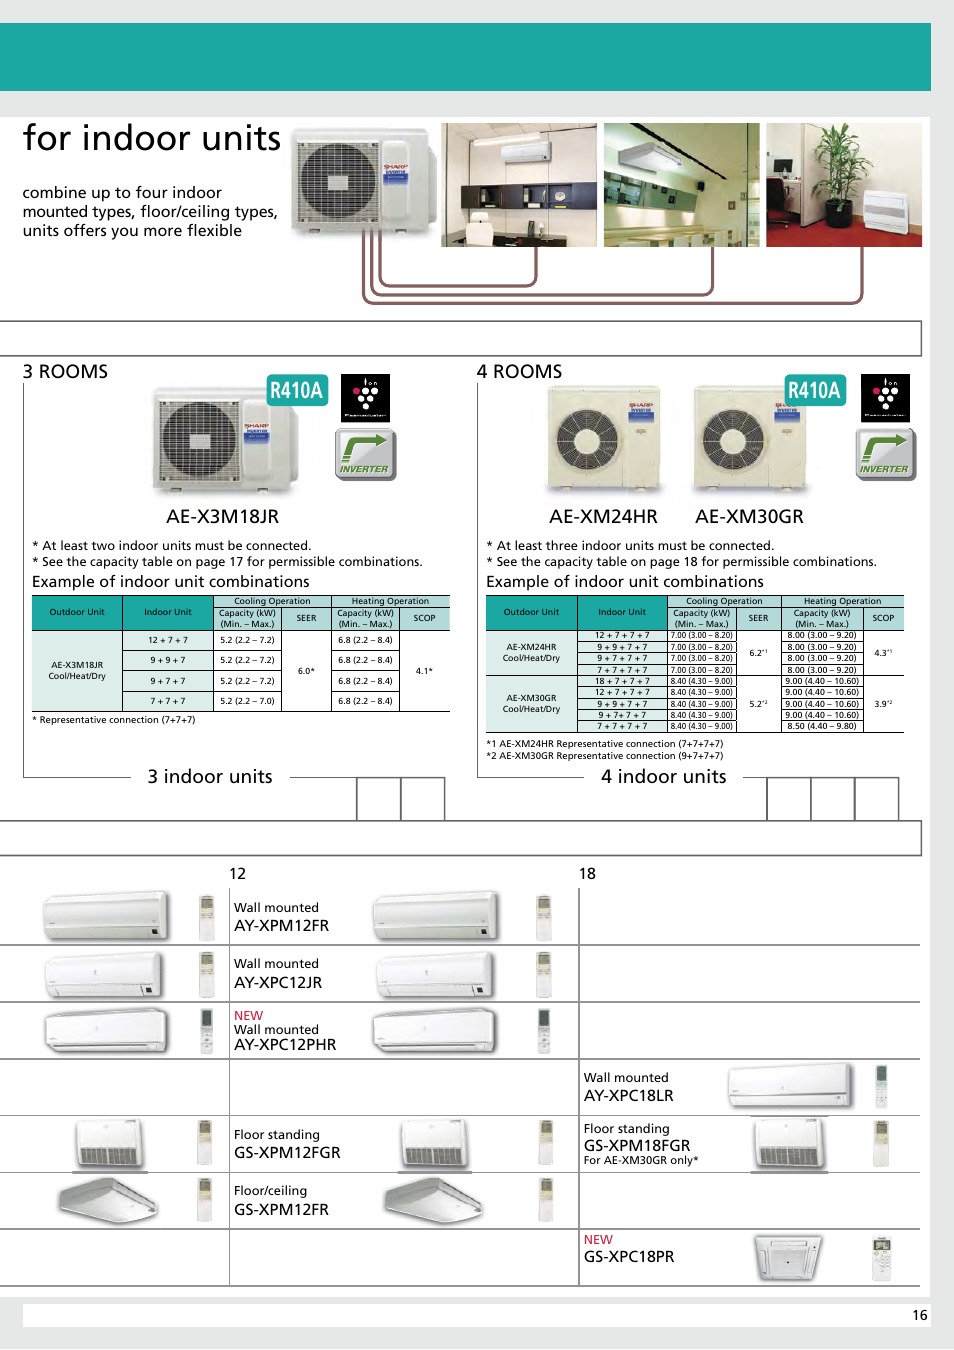 Inverter, For indoor units, R410a | Sharp AY-XP9RMR-AE-X9RMR User Manual |  Page 17 / 24 | Original mode